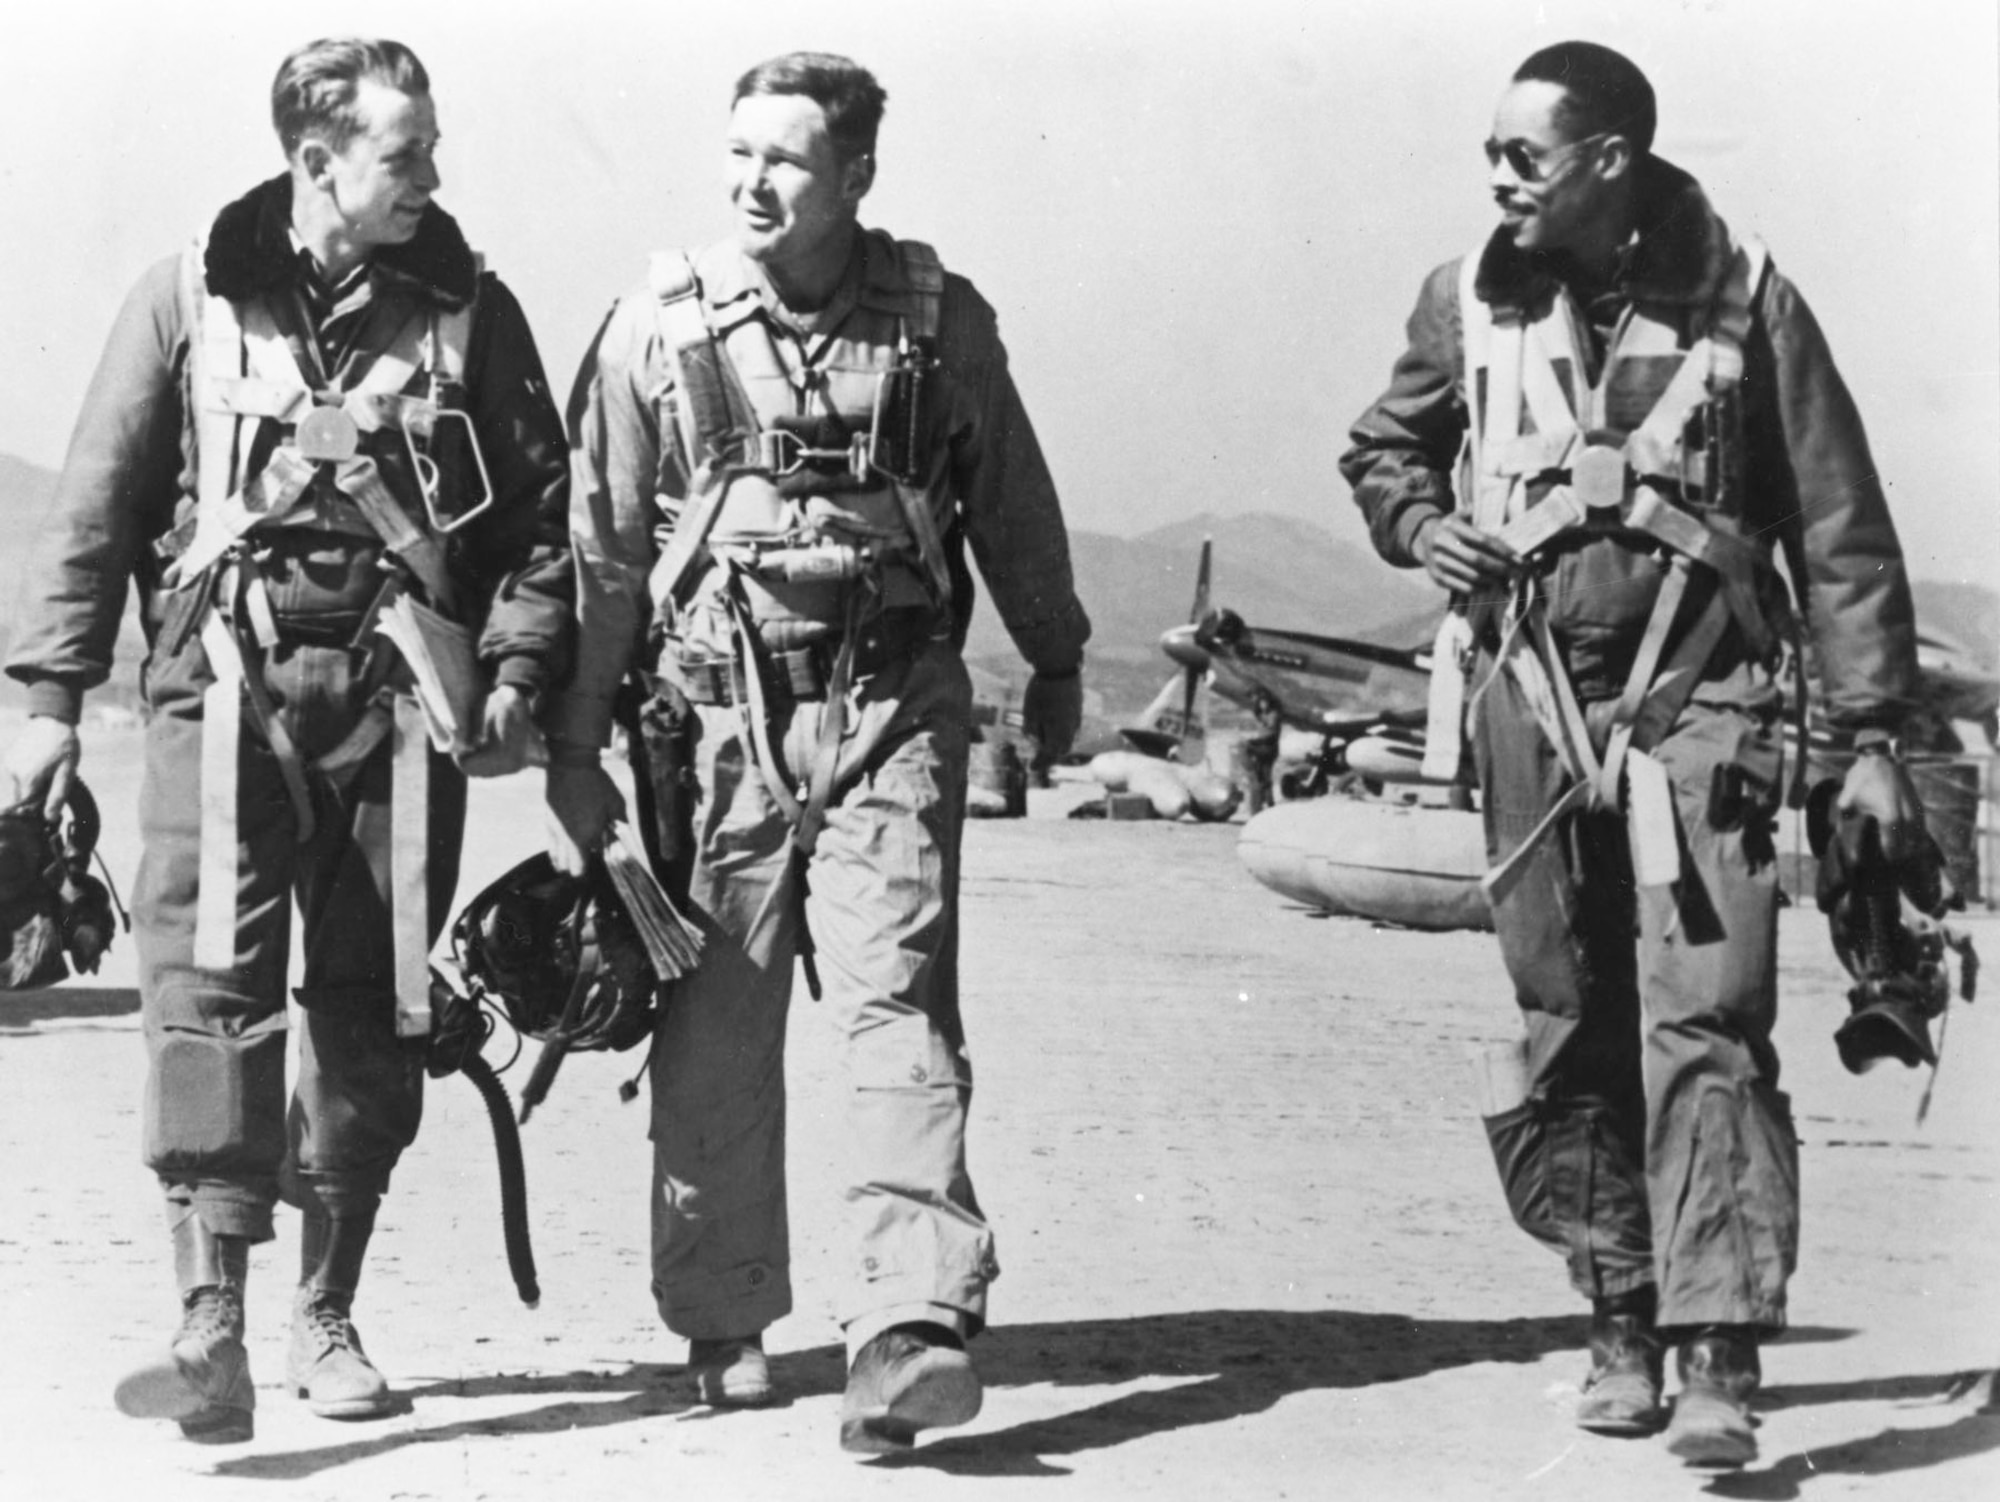 F-51 pilots returning from a mission. (Left to right) 1st Lt. George McKee, Capt. Samuel Sanders and Capt. Leroy Roberts, a former Tuskegee Airman. (U.S. Air Force photo)